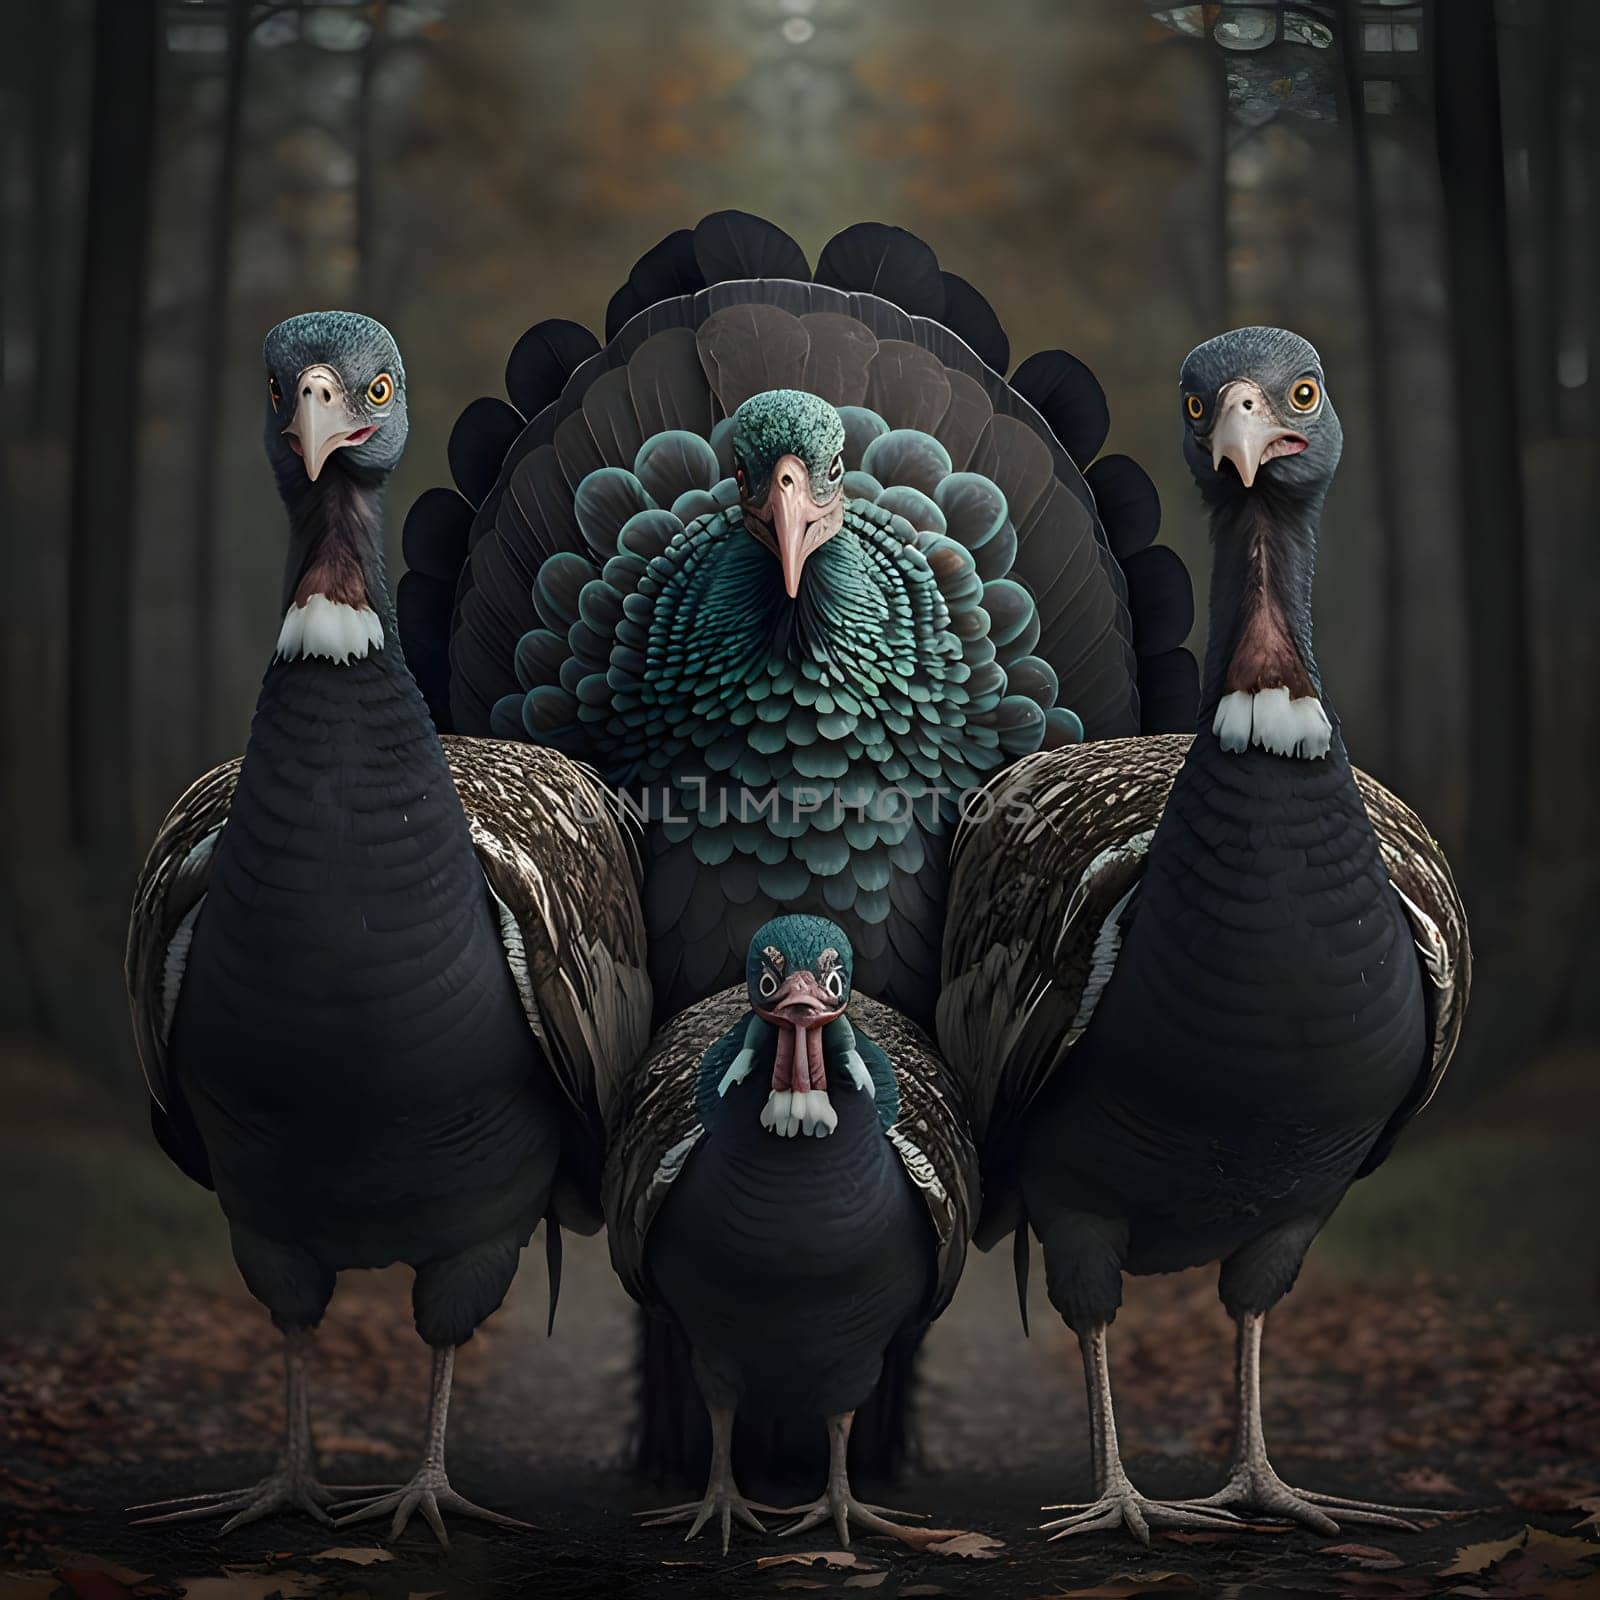 Family of turkeys in the forest portrait. Turkey as the main dish of thanksgiving for the harvest. An atmosphere of joy and celebration.